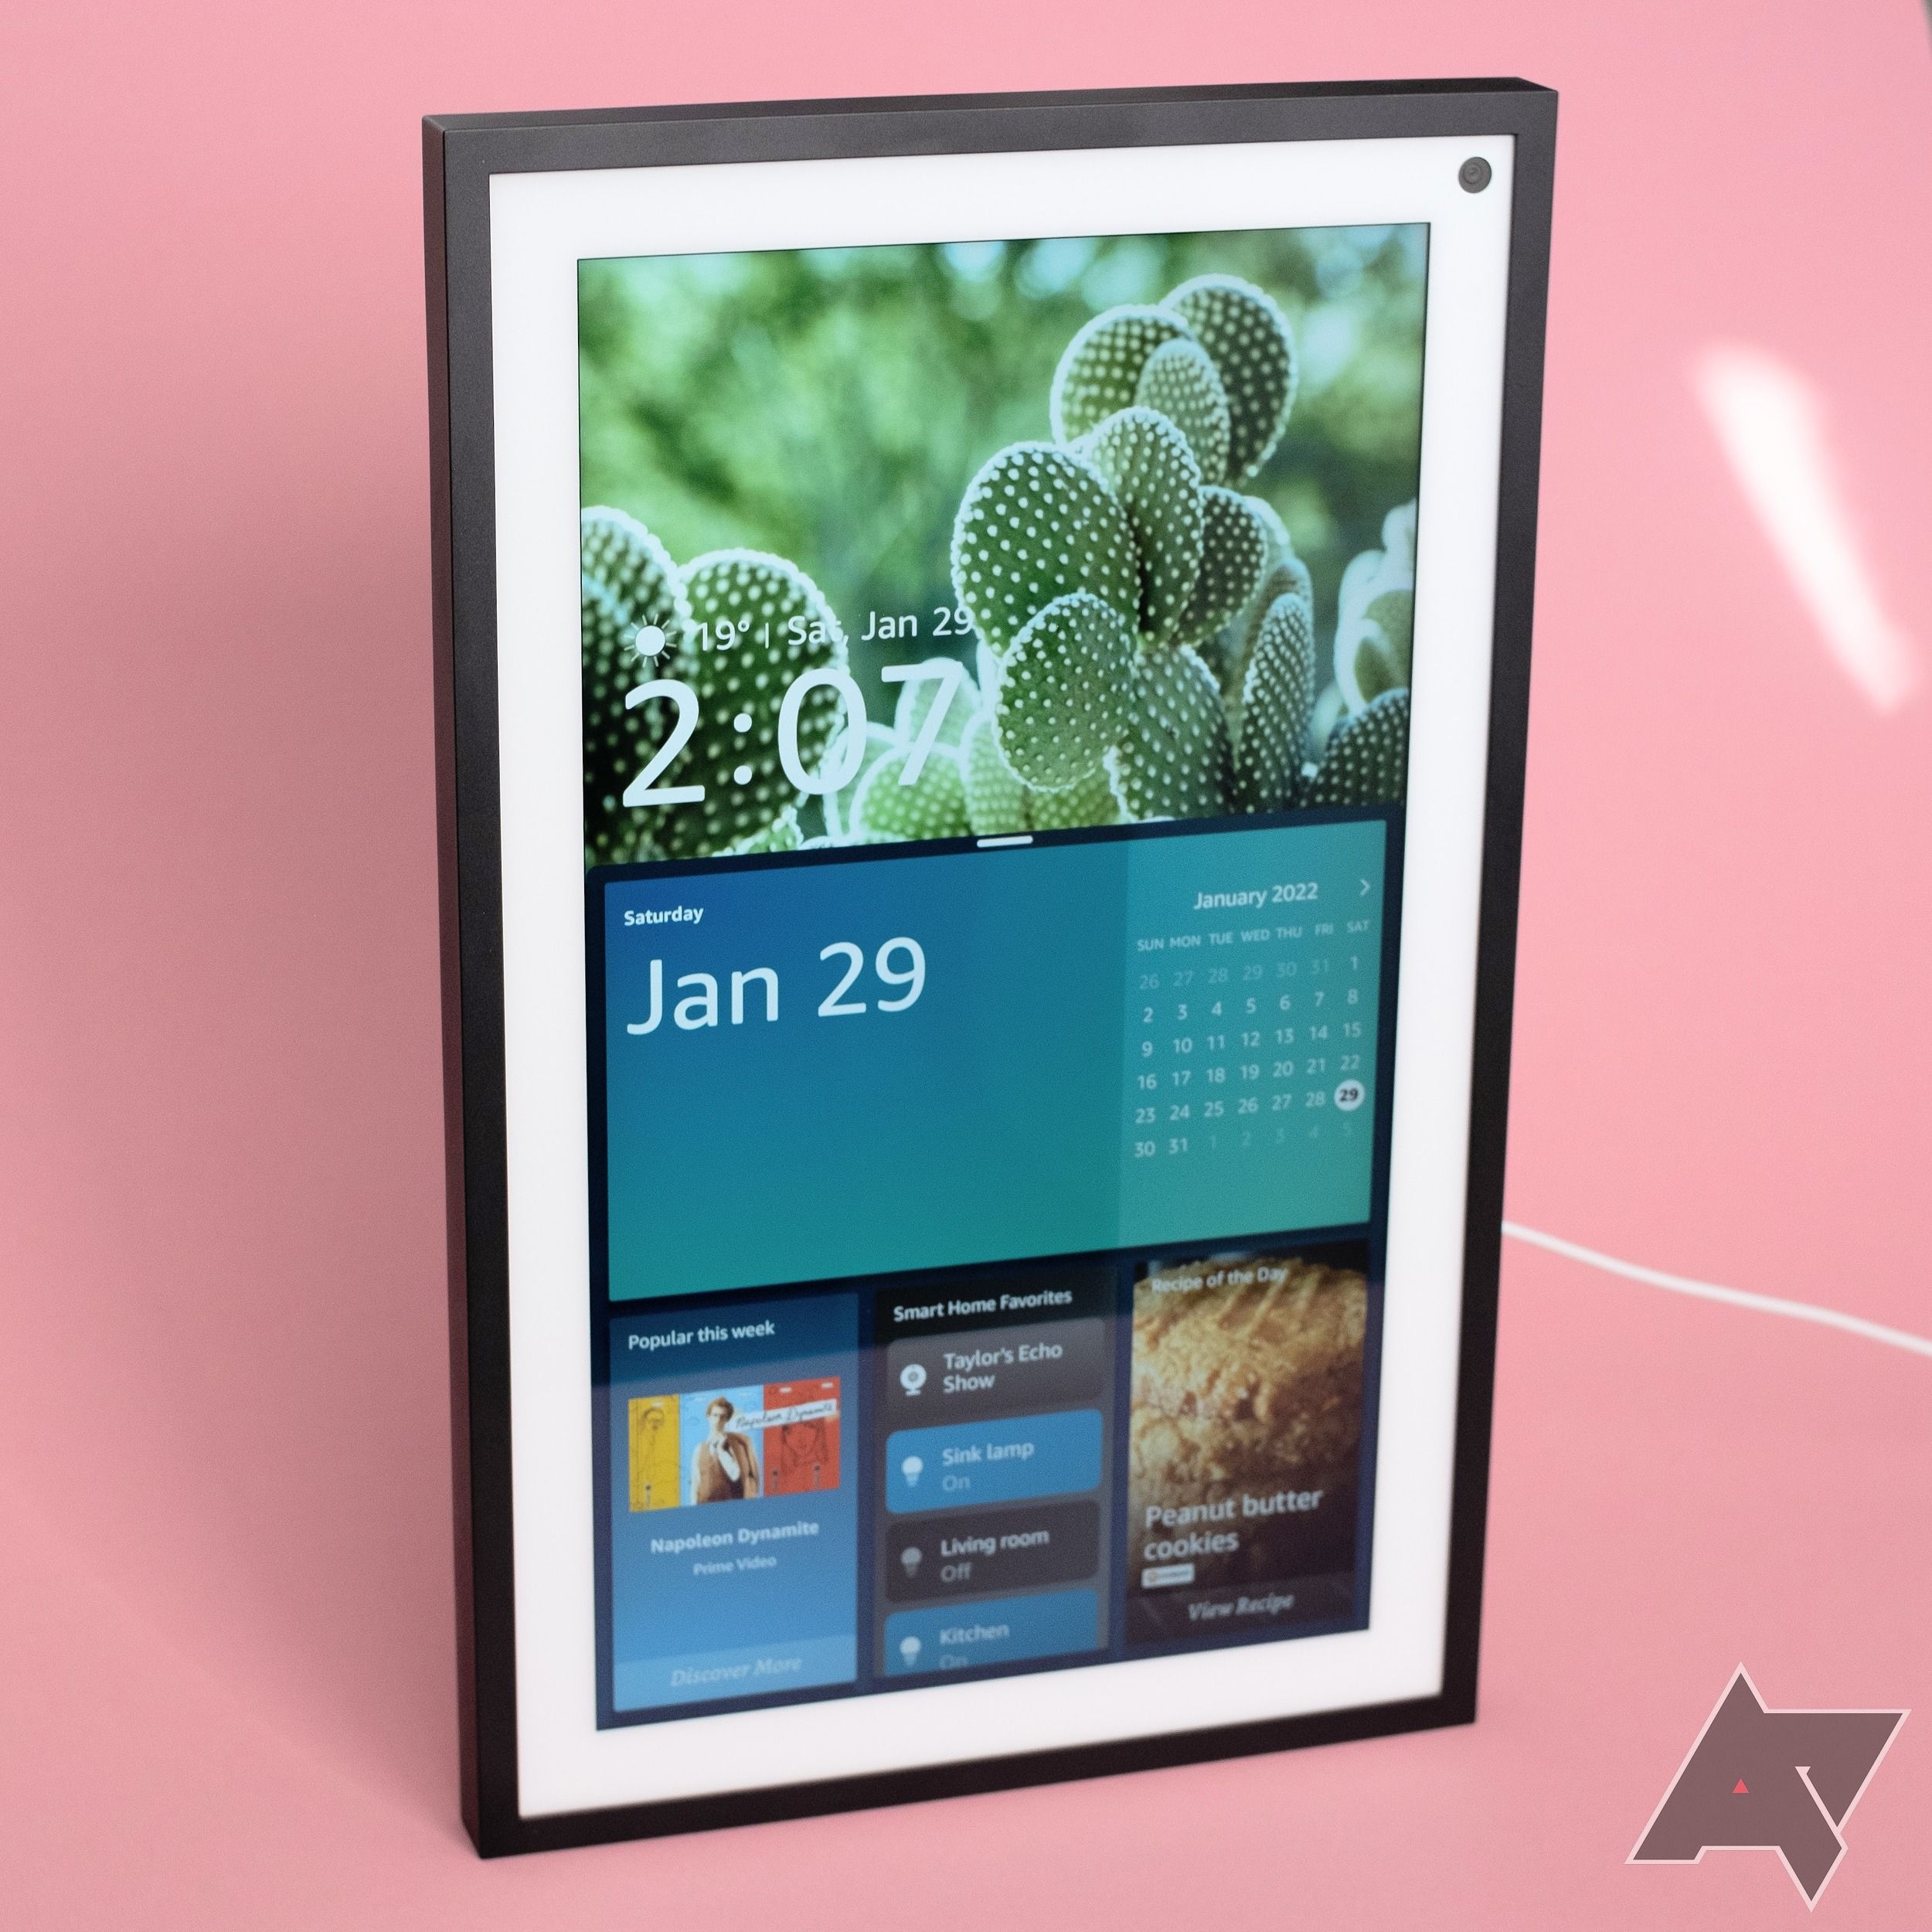 EVERYTHING You Can Do With The Echo Show 15 